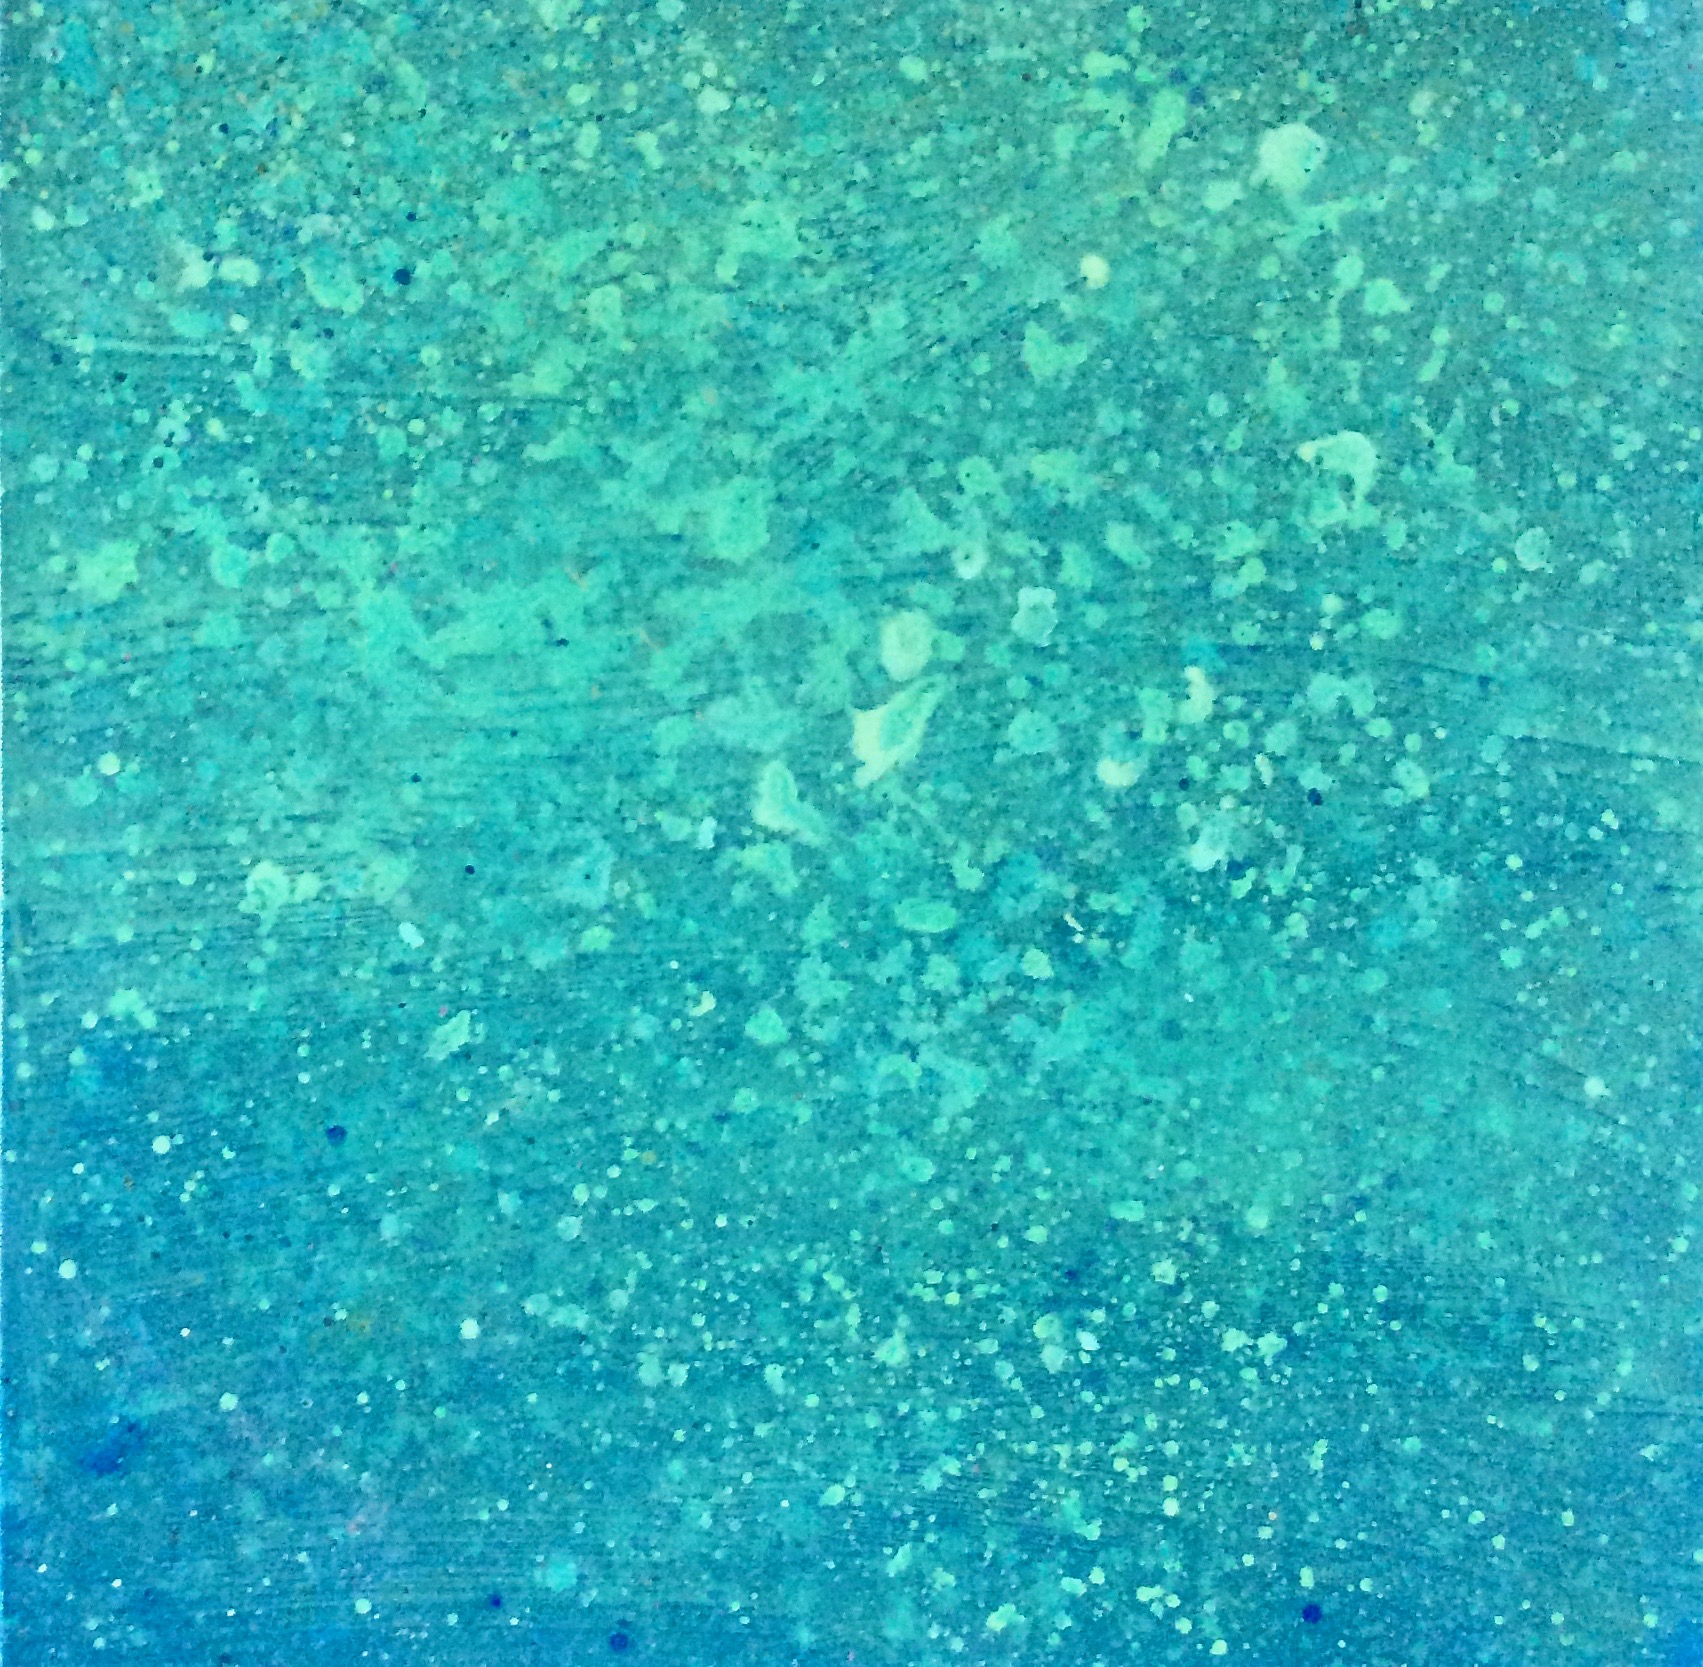  Water, 2014 24 x 24 inches Acrylic on canvas 